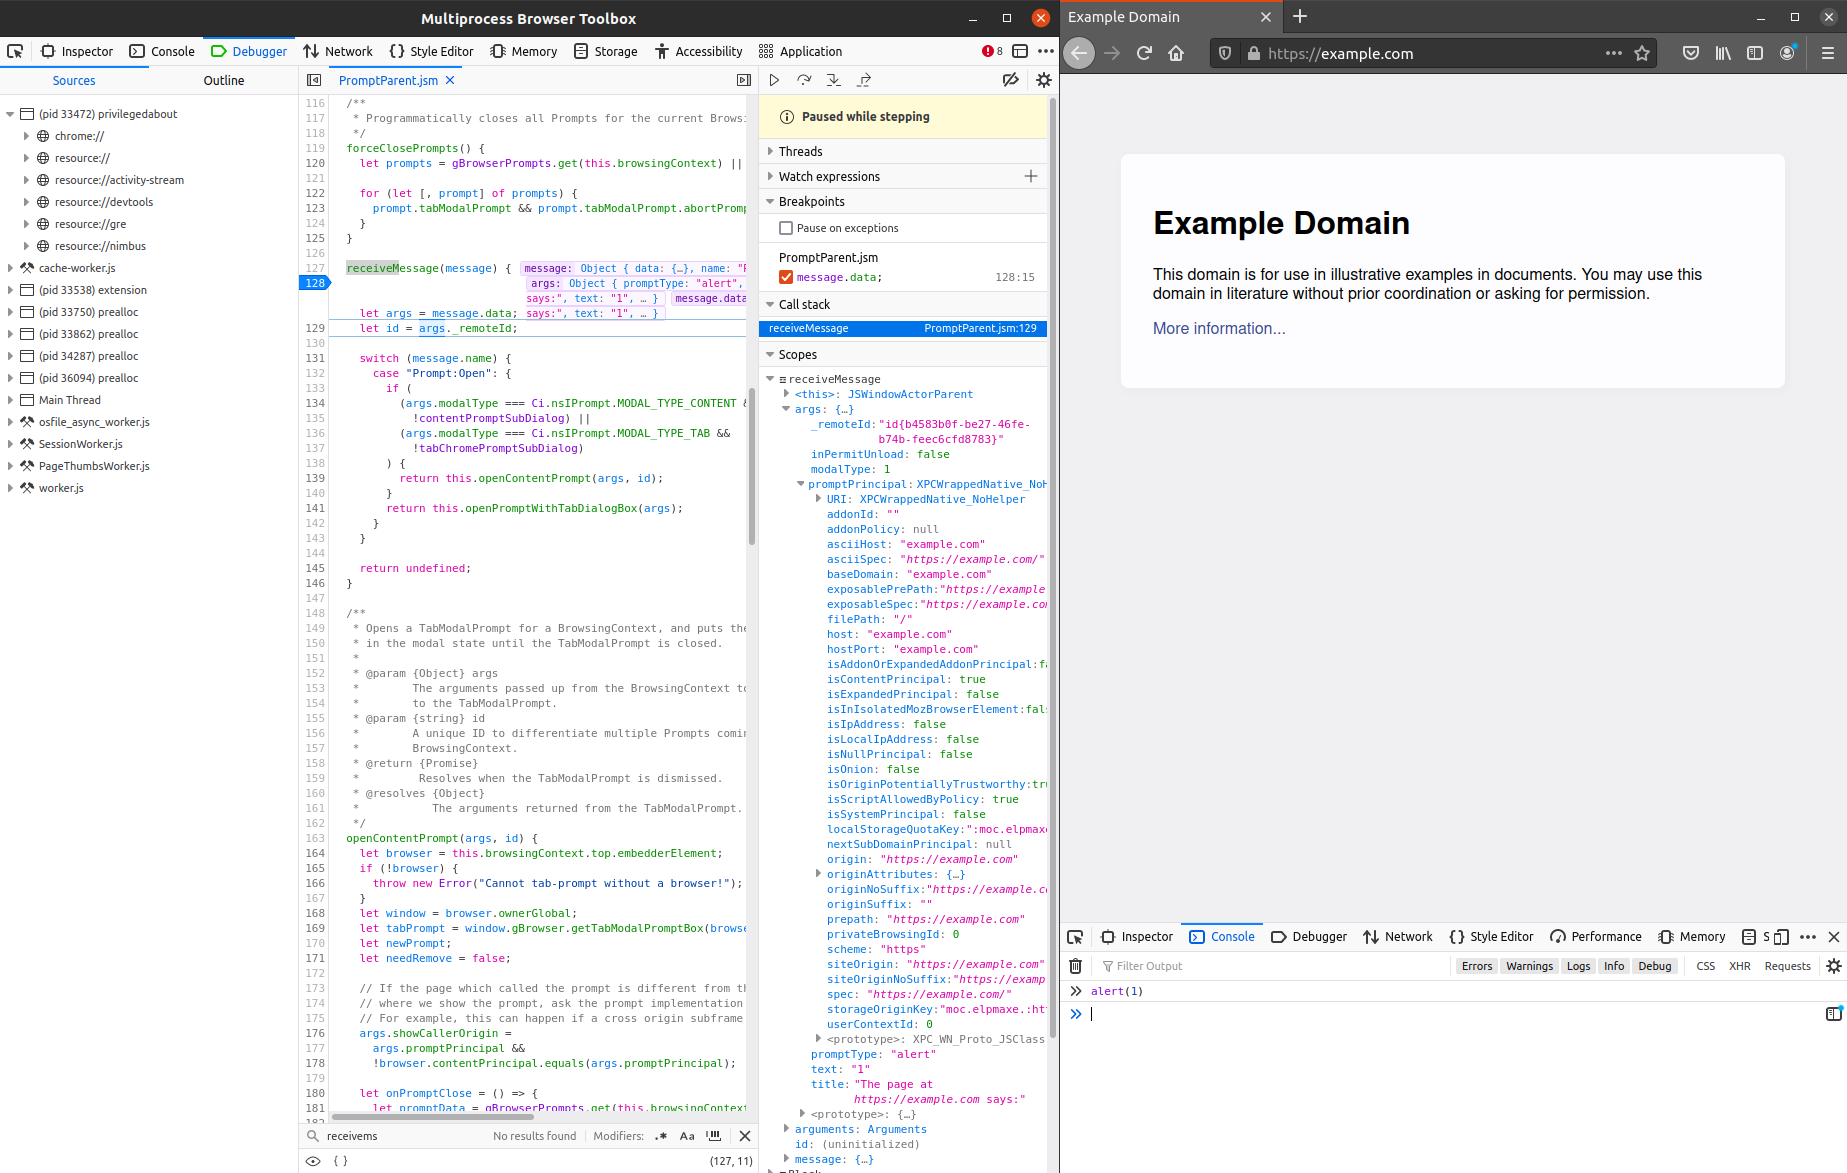 Hitting a breakpoint in Firefox’s parent process using Firefox Developer Tools (left)